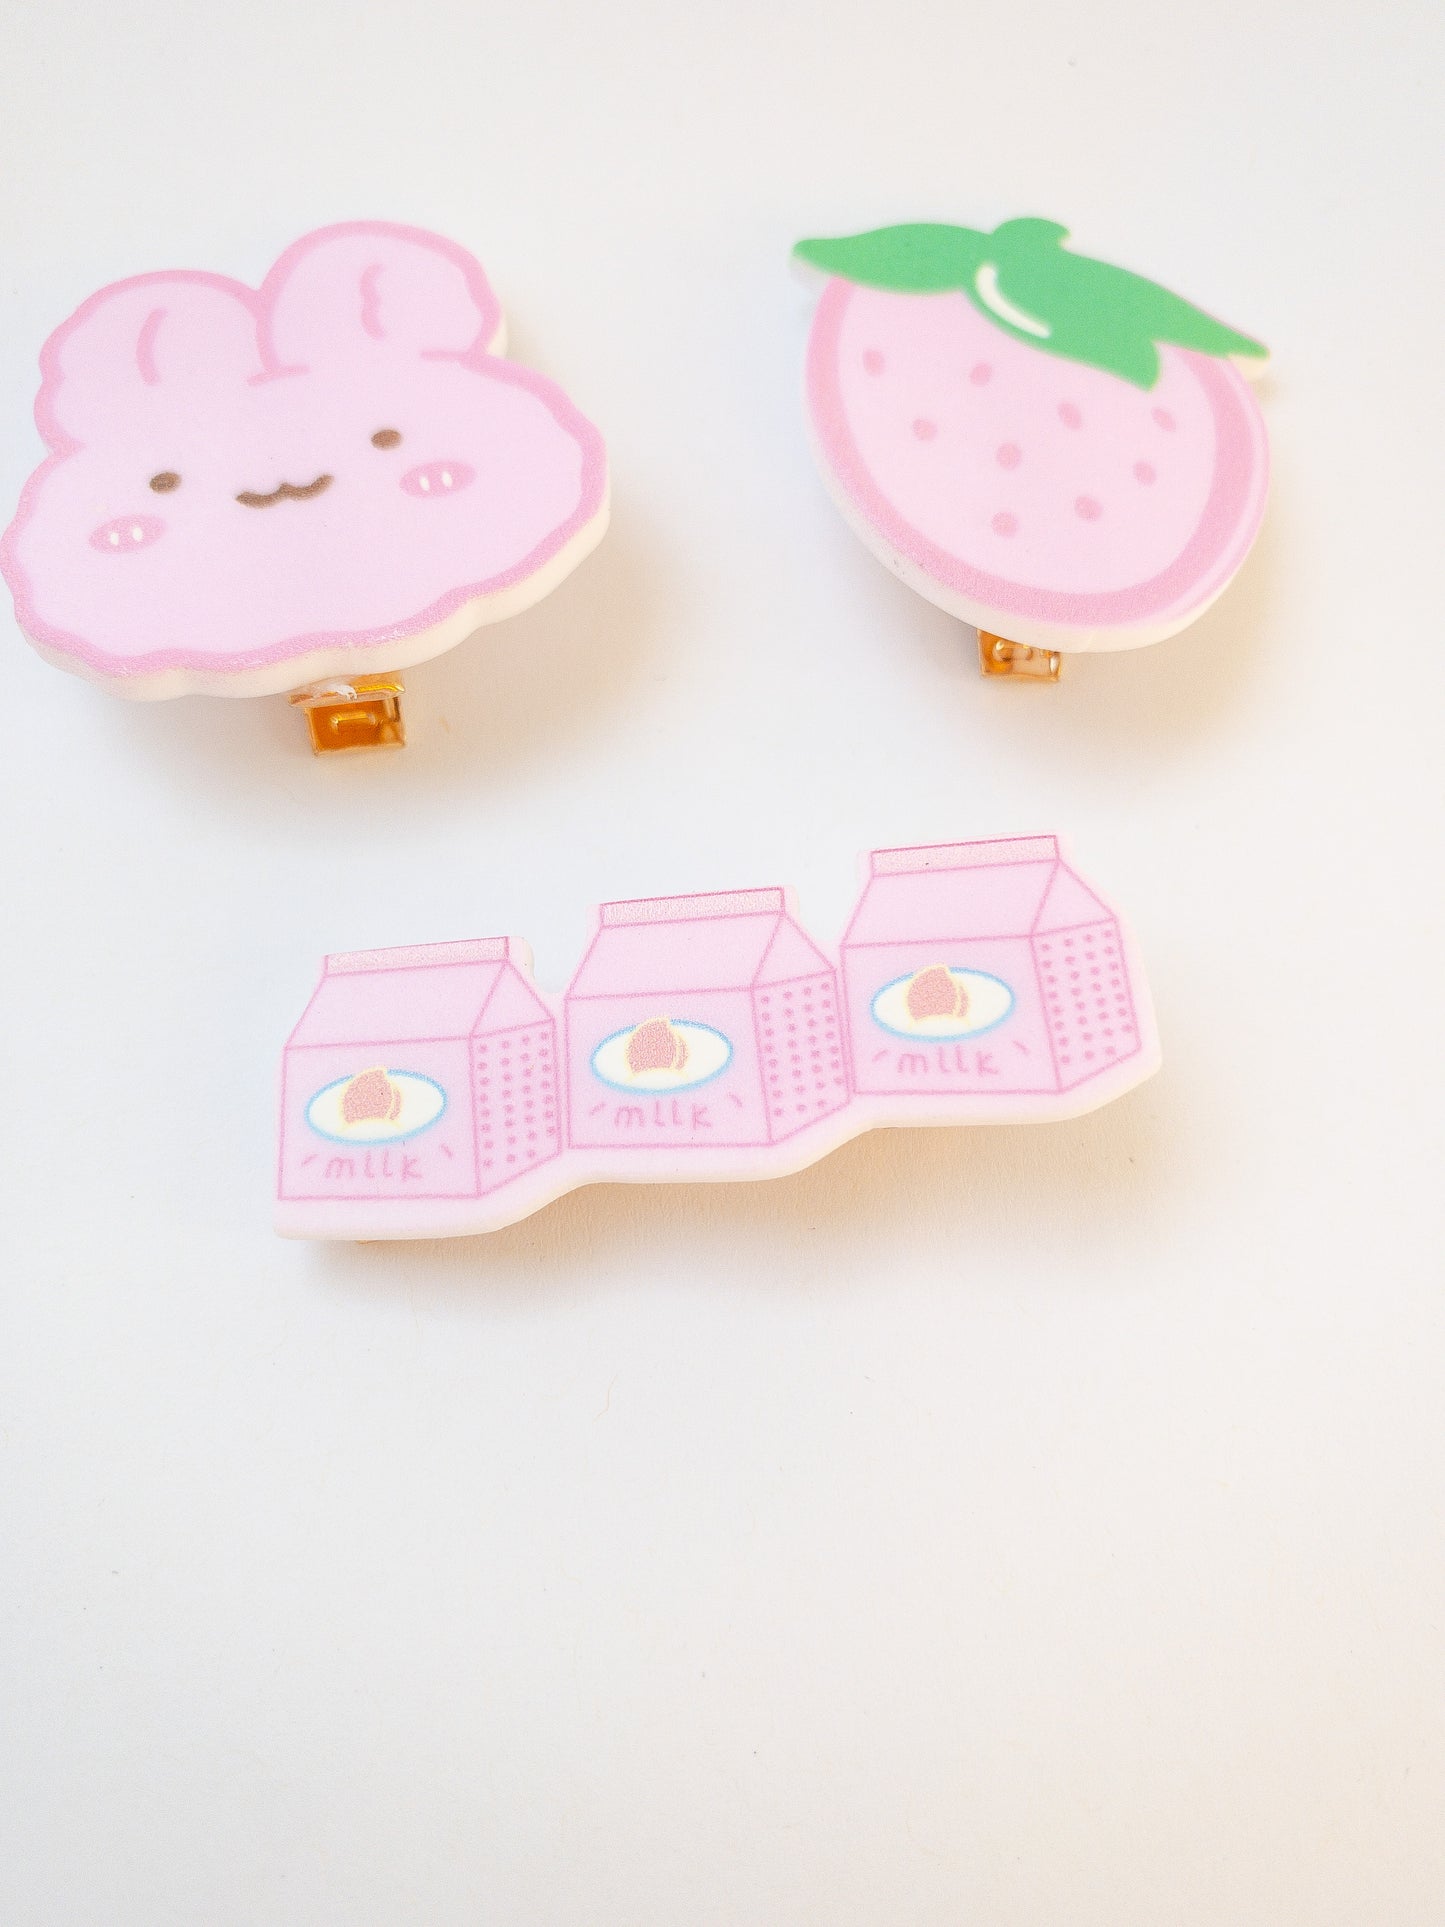 A set of 3 pink hair clips in the sweetest shapes. A pink fluffy cartoon bunny, a big juicy strawberry, and a trio of strawberry milks.  Gold alligator clips